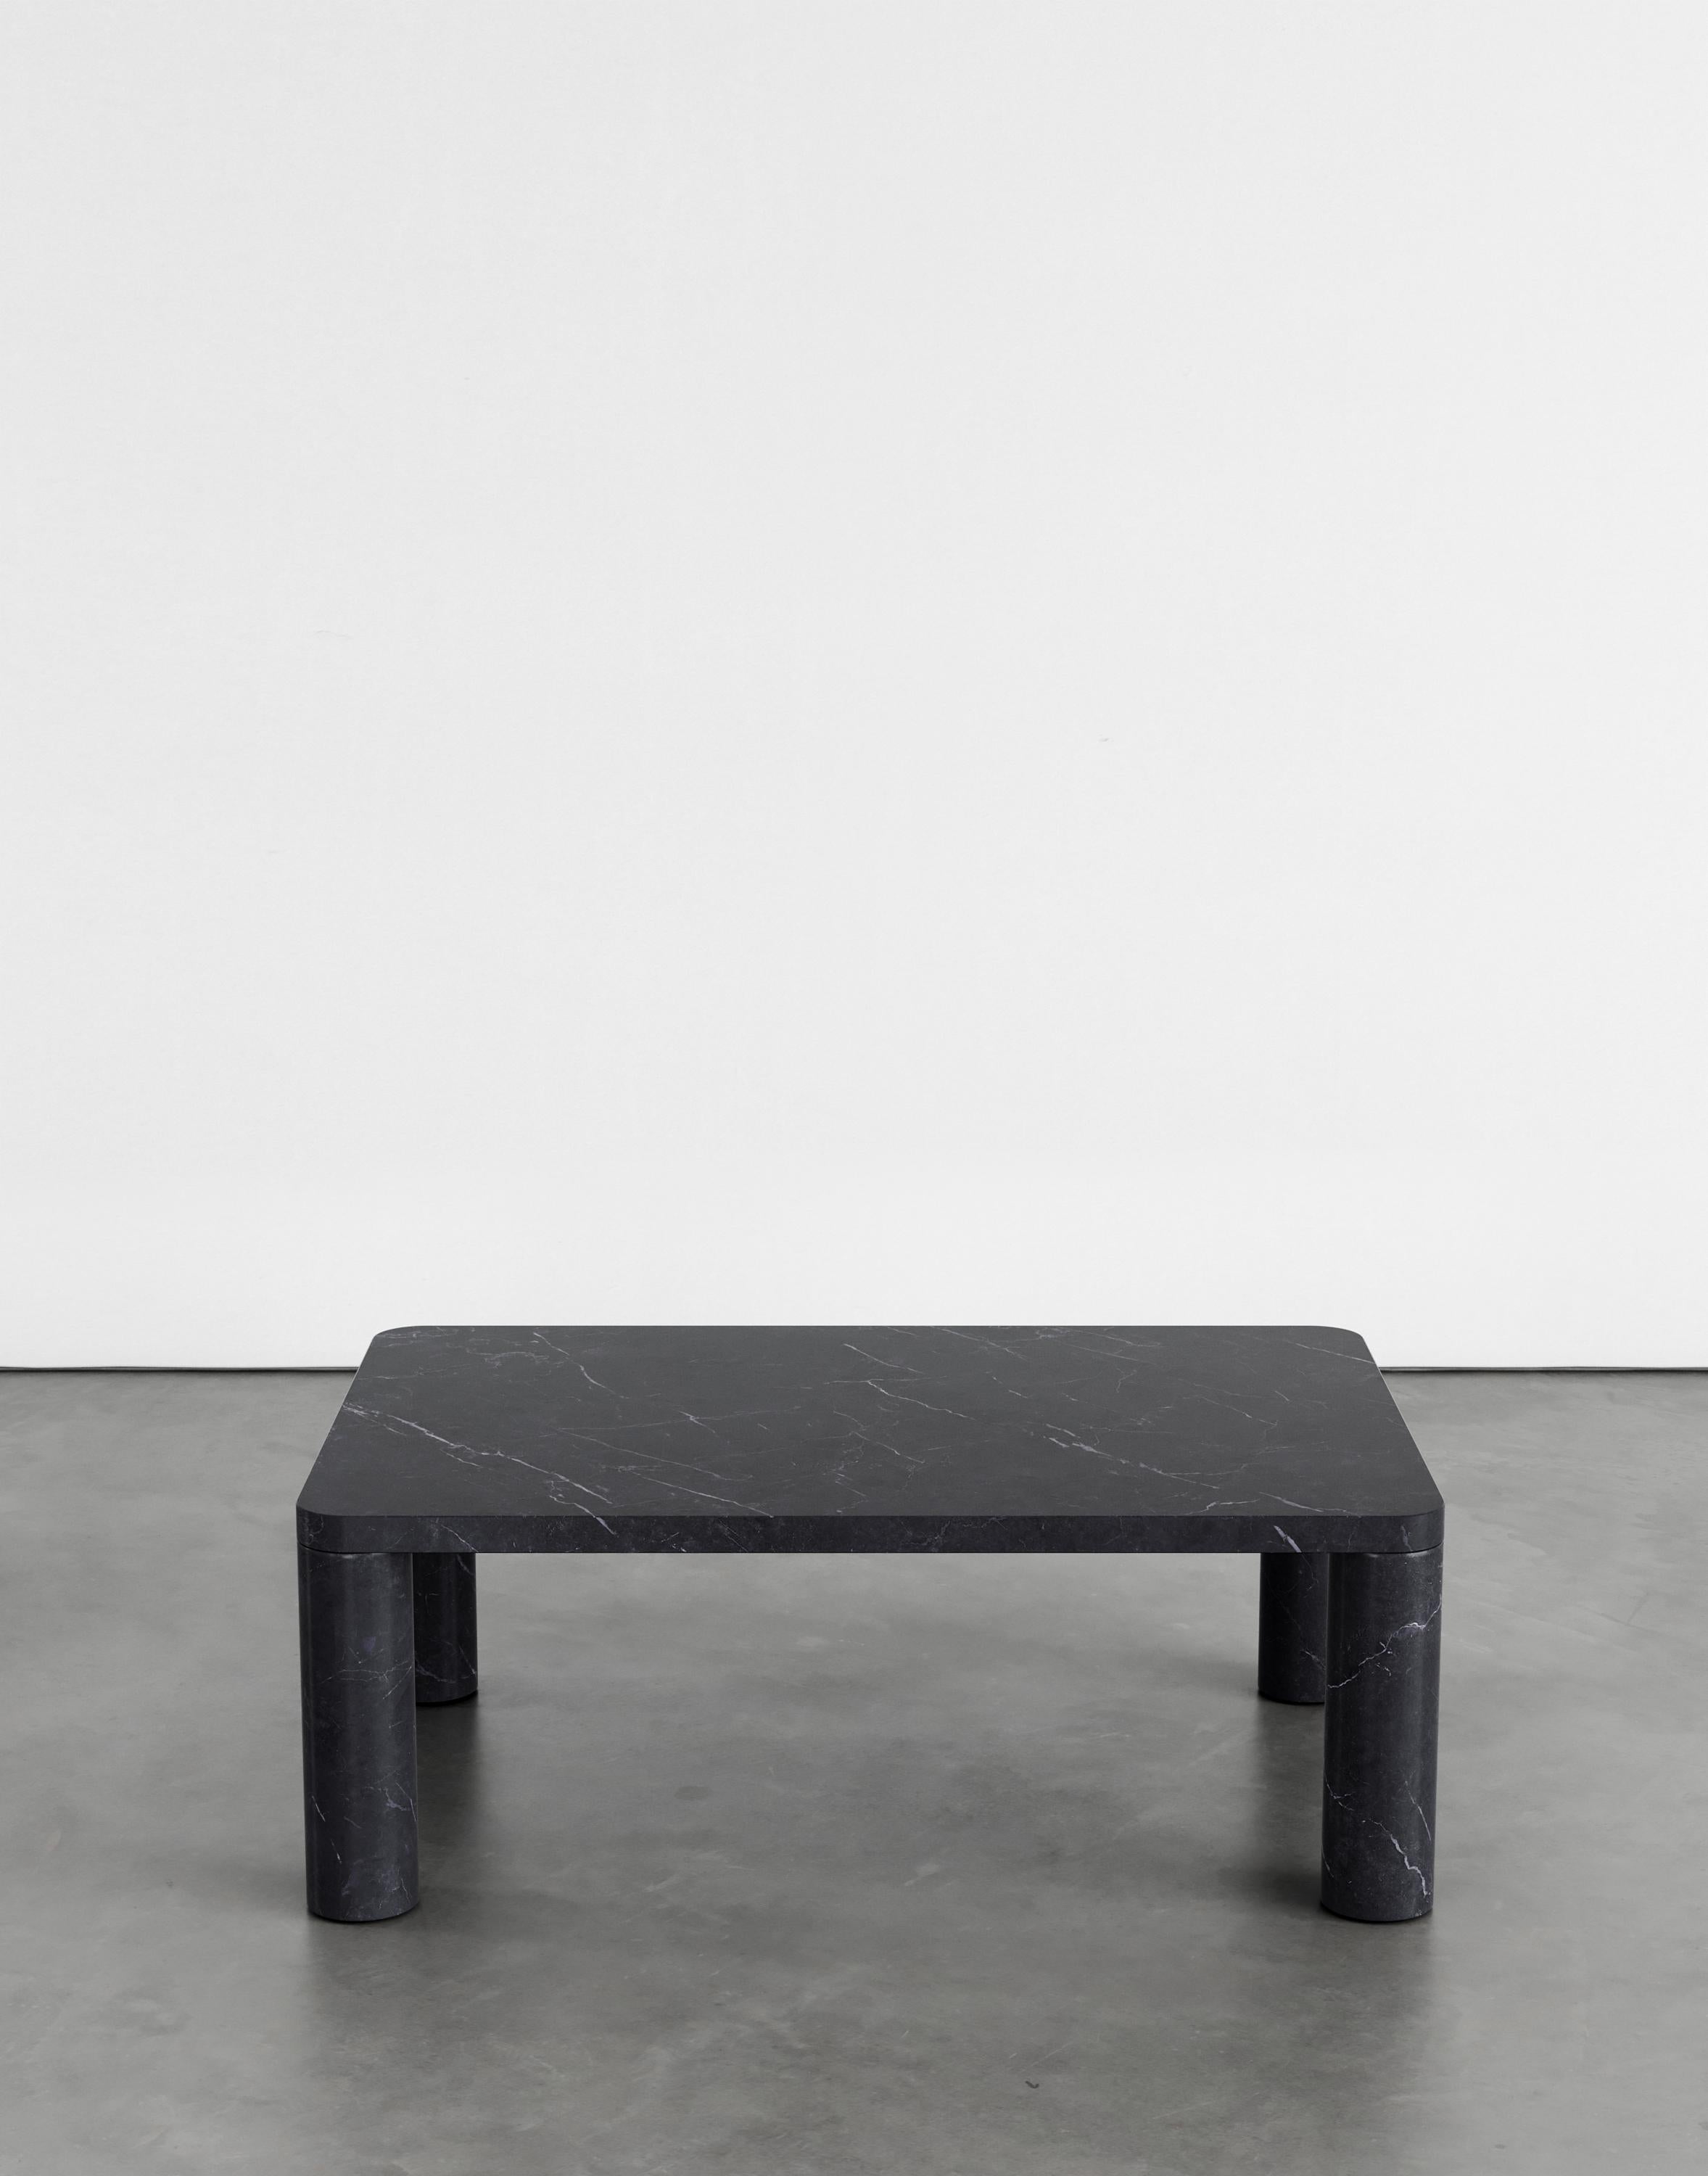 Nadia 96 Coffee Table by Agglomerati. 
Dimensions: D 60 x W 90 x H 33 cm. 
Materials: Black Marquina. Available in other stones. 

Agglomerati is a London-based studio creating distinctive stone furniture. Established in 2019 by Australian